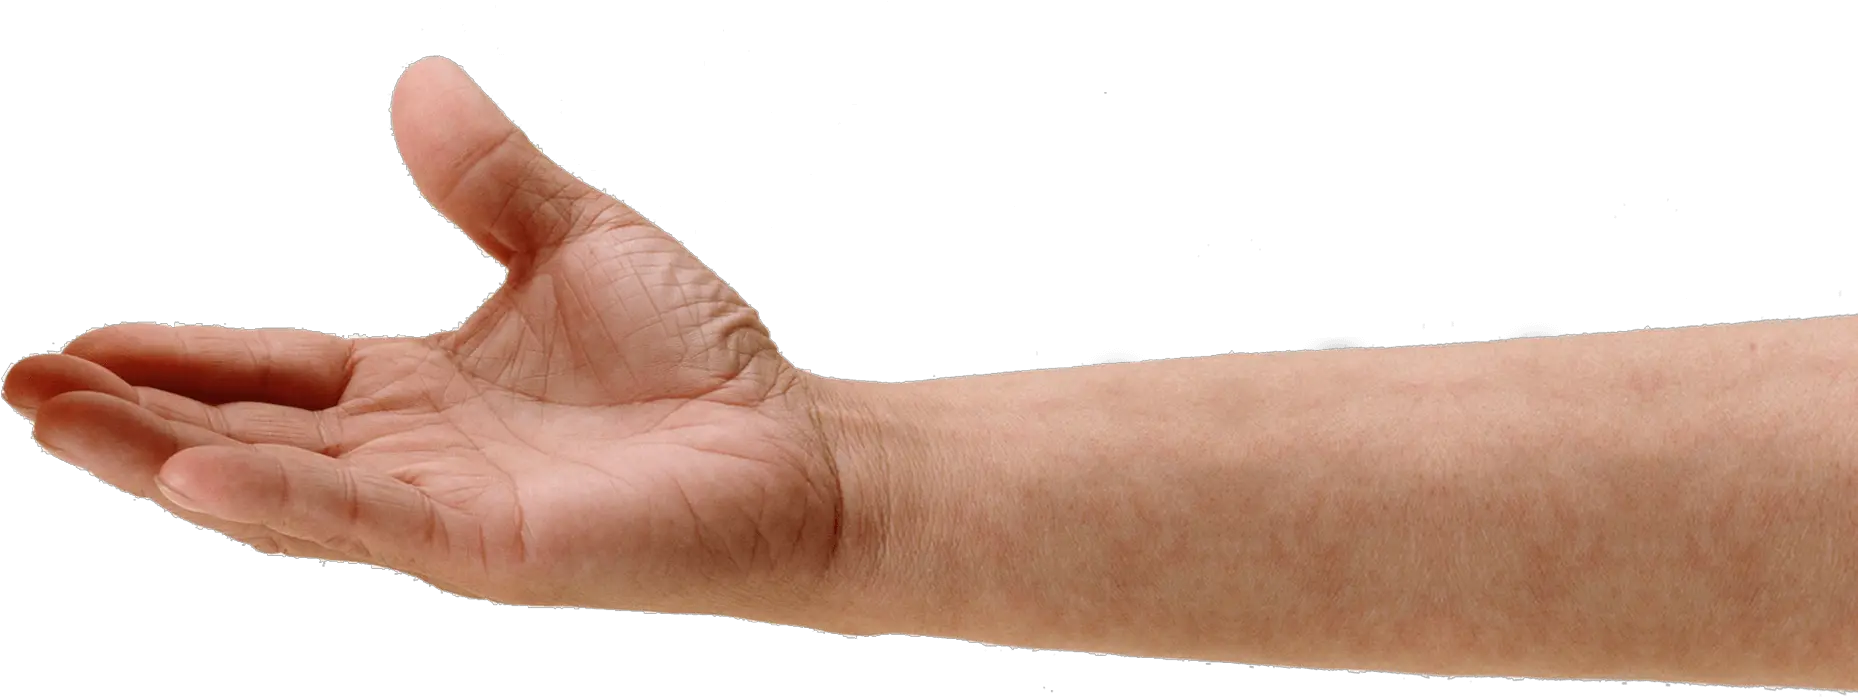 Download Human Hand Png Transparent Png Png Images Hand Reaching Down Png Skeleton Hand Png